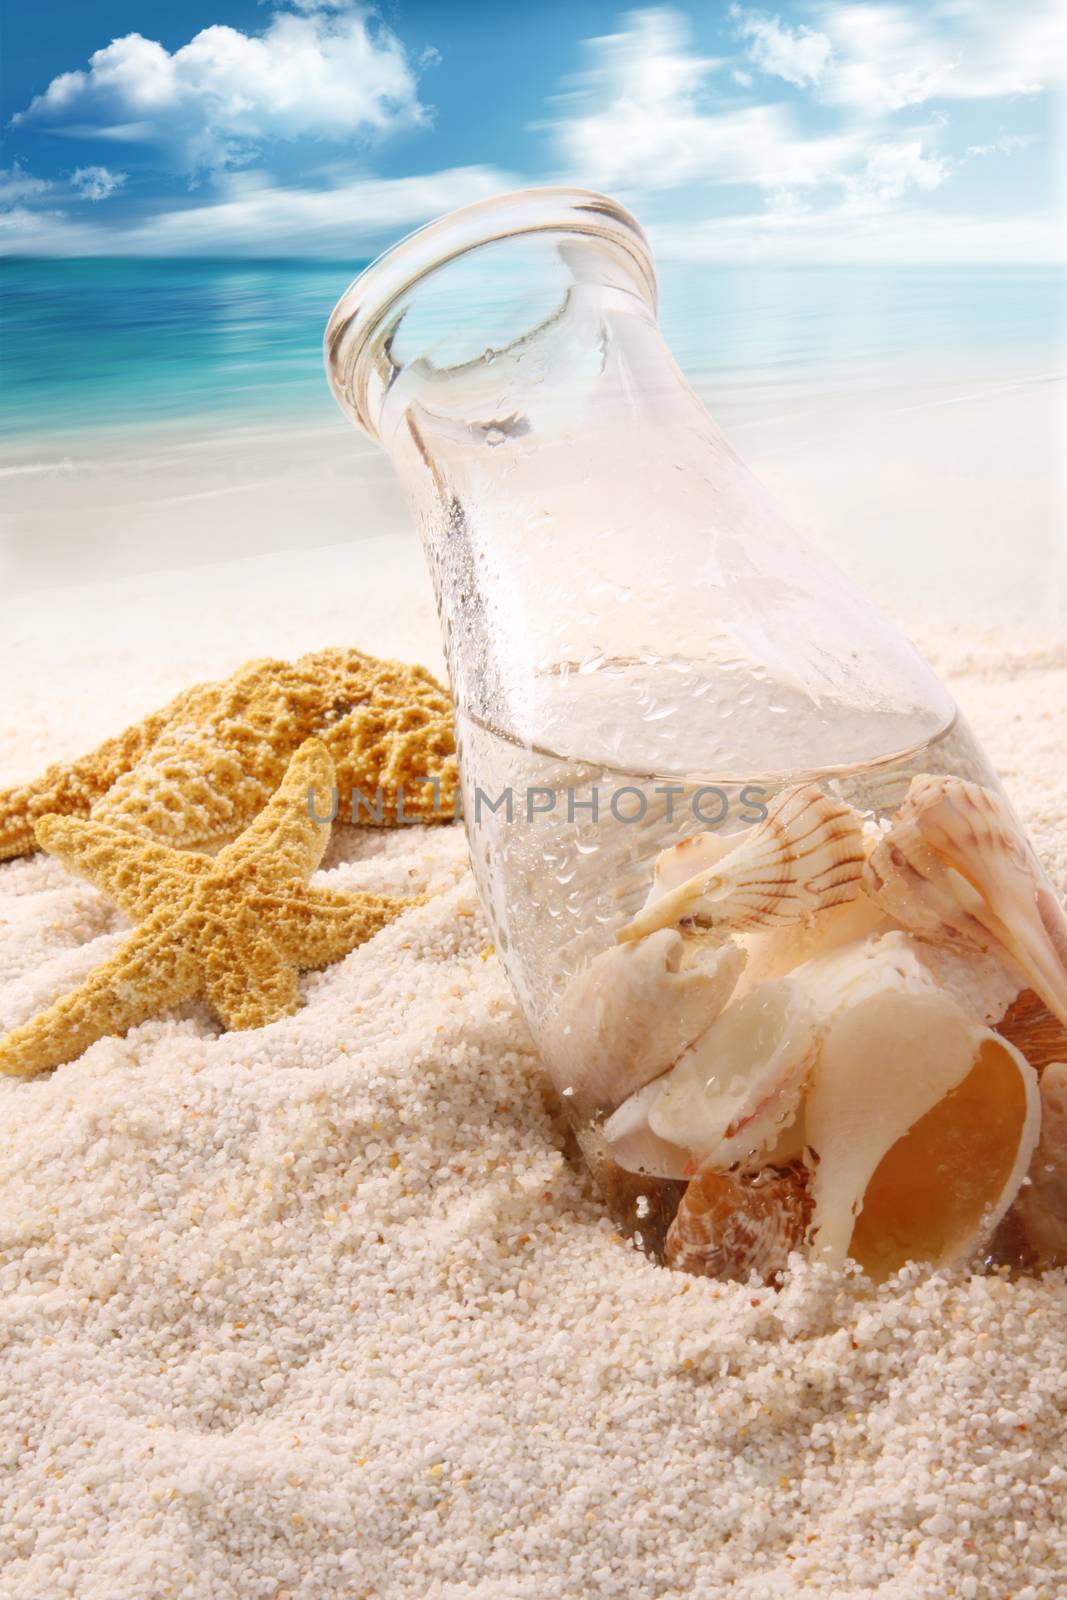  Bottle  with shells on the beach by Sandralise